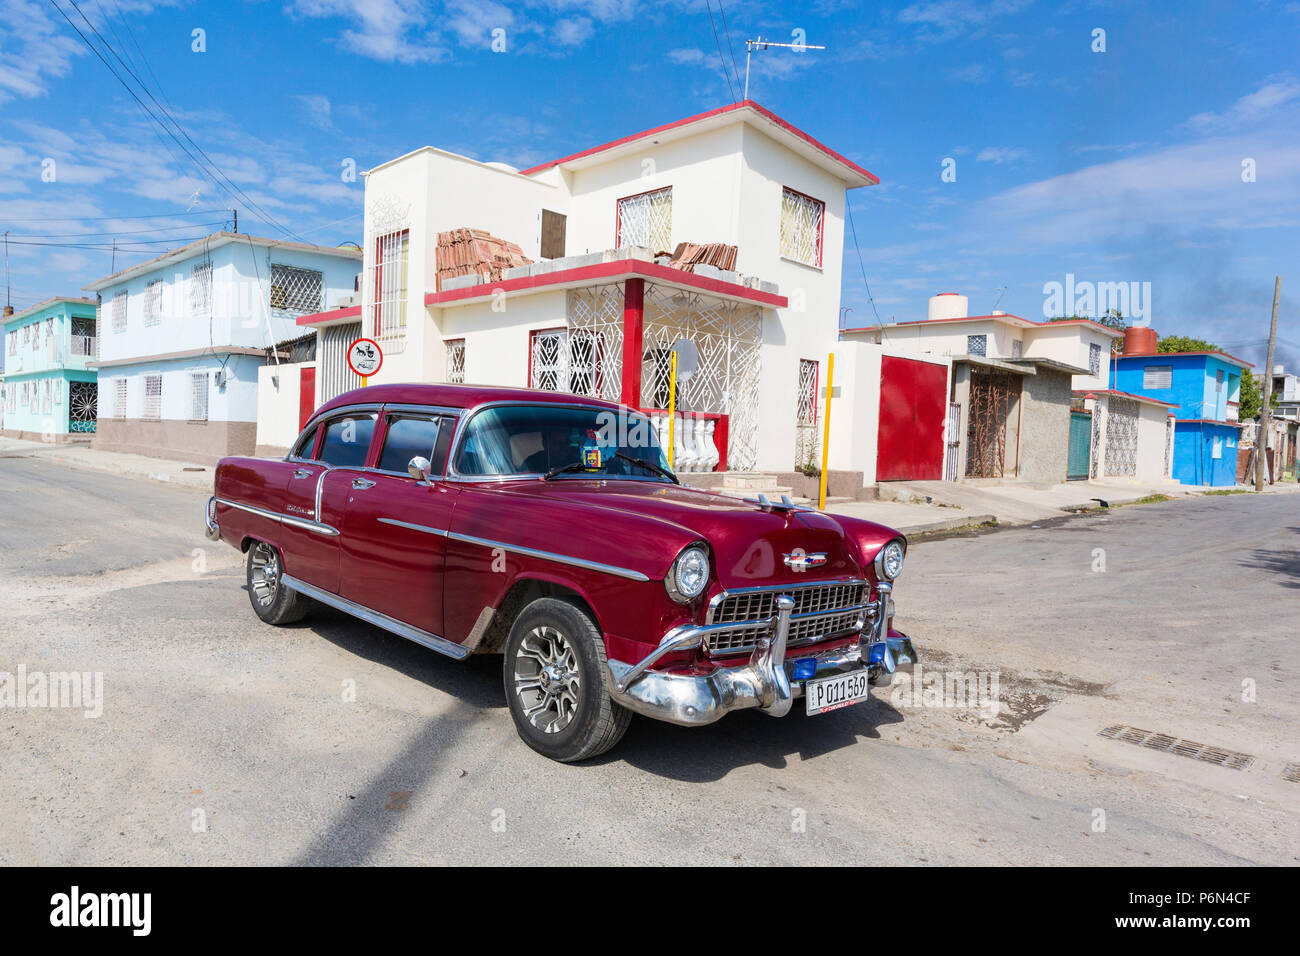 Classic 1955 Chevrolet Bel Air taxi, locally known as 'almendrones' in the town of Cienfuegos, Cuba. Stock Photo